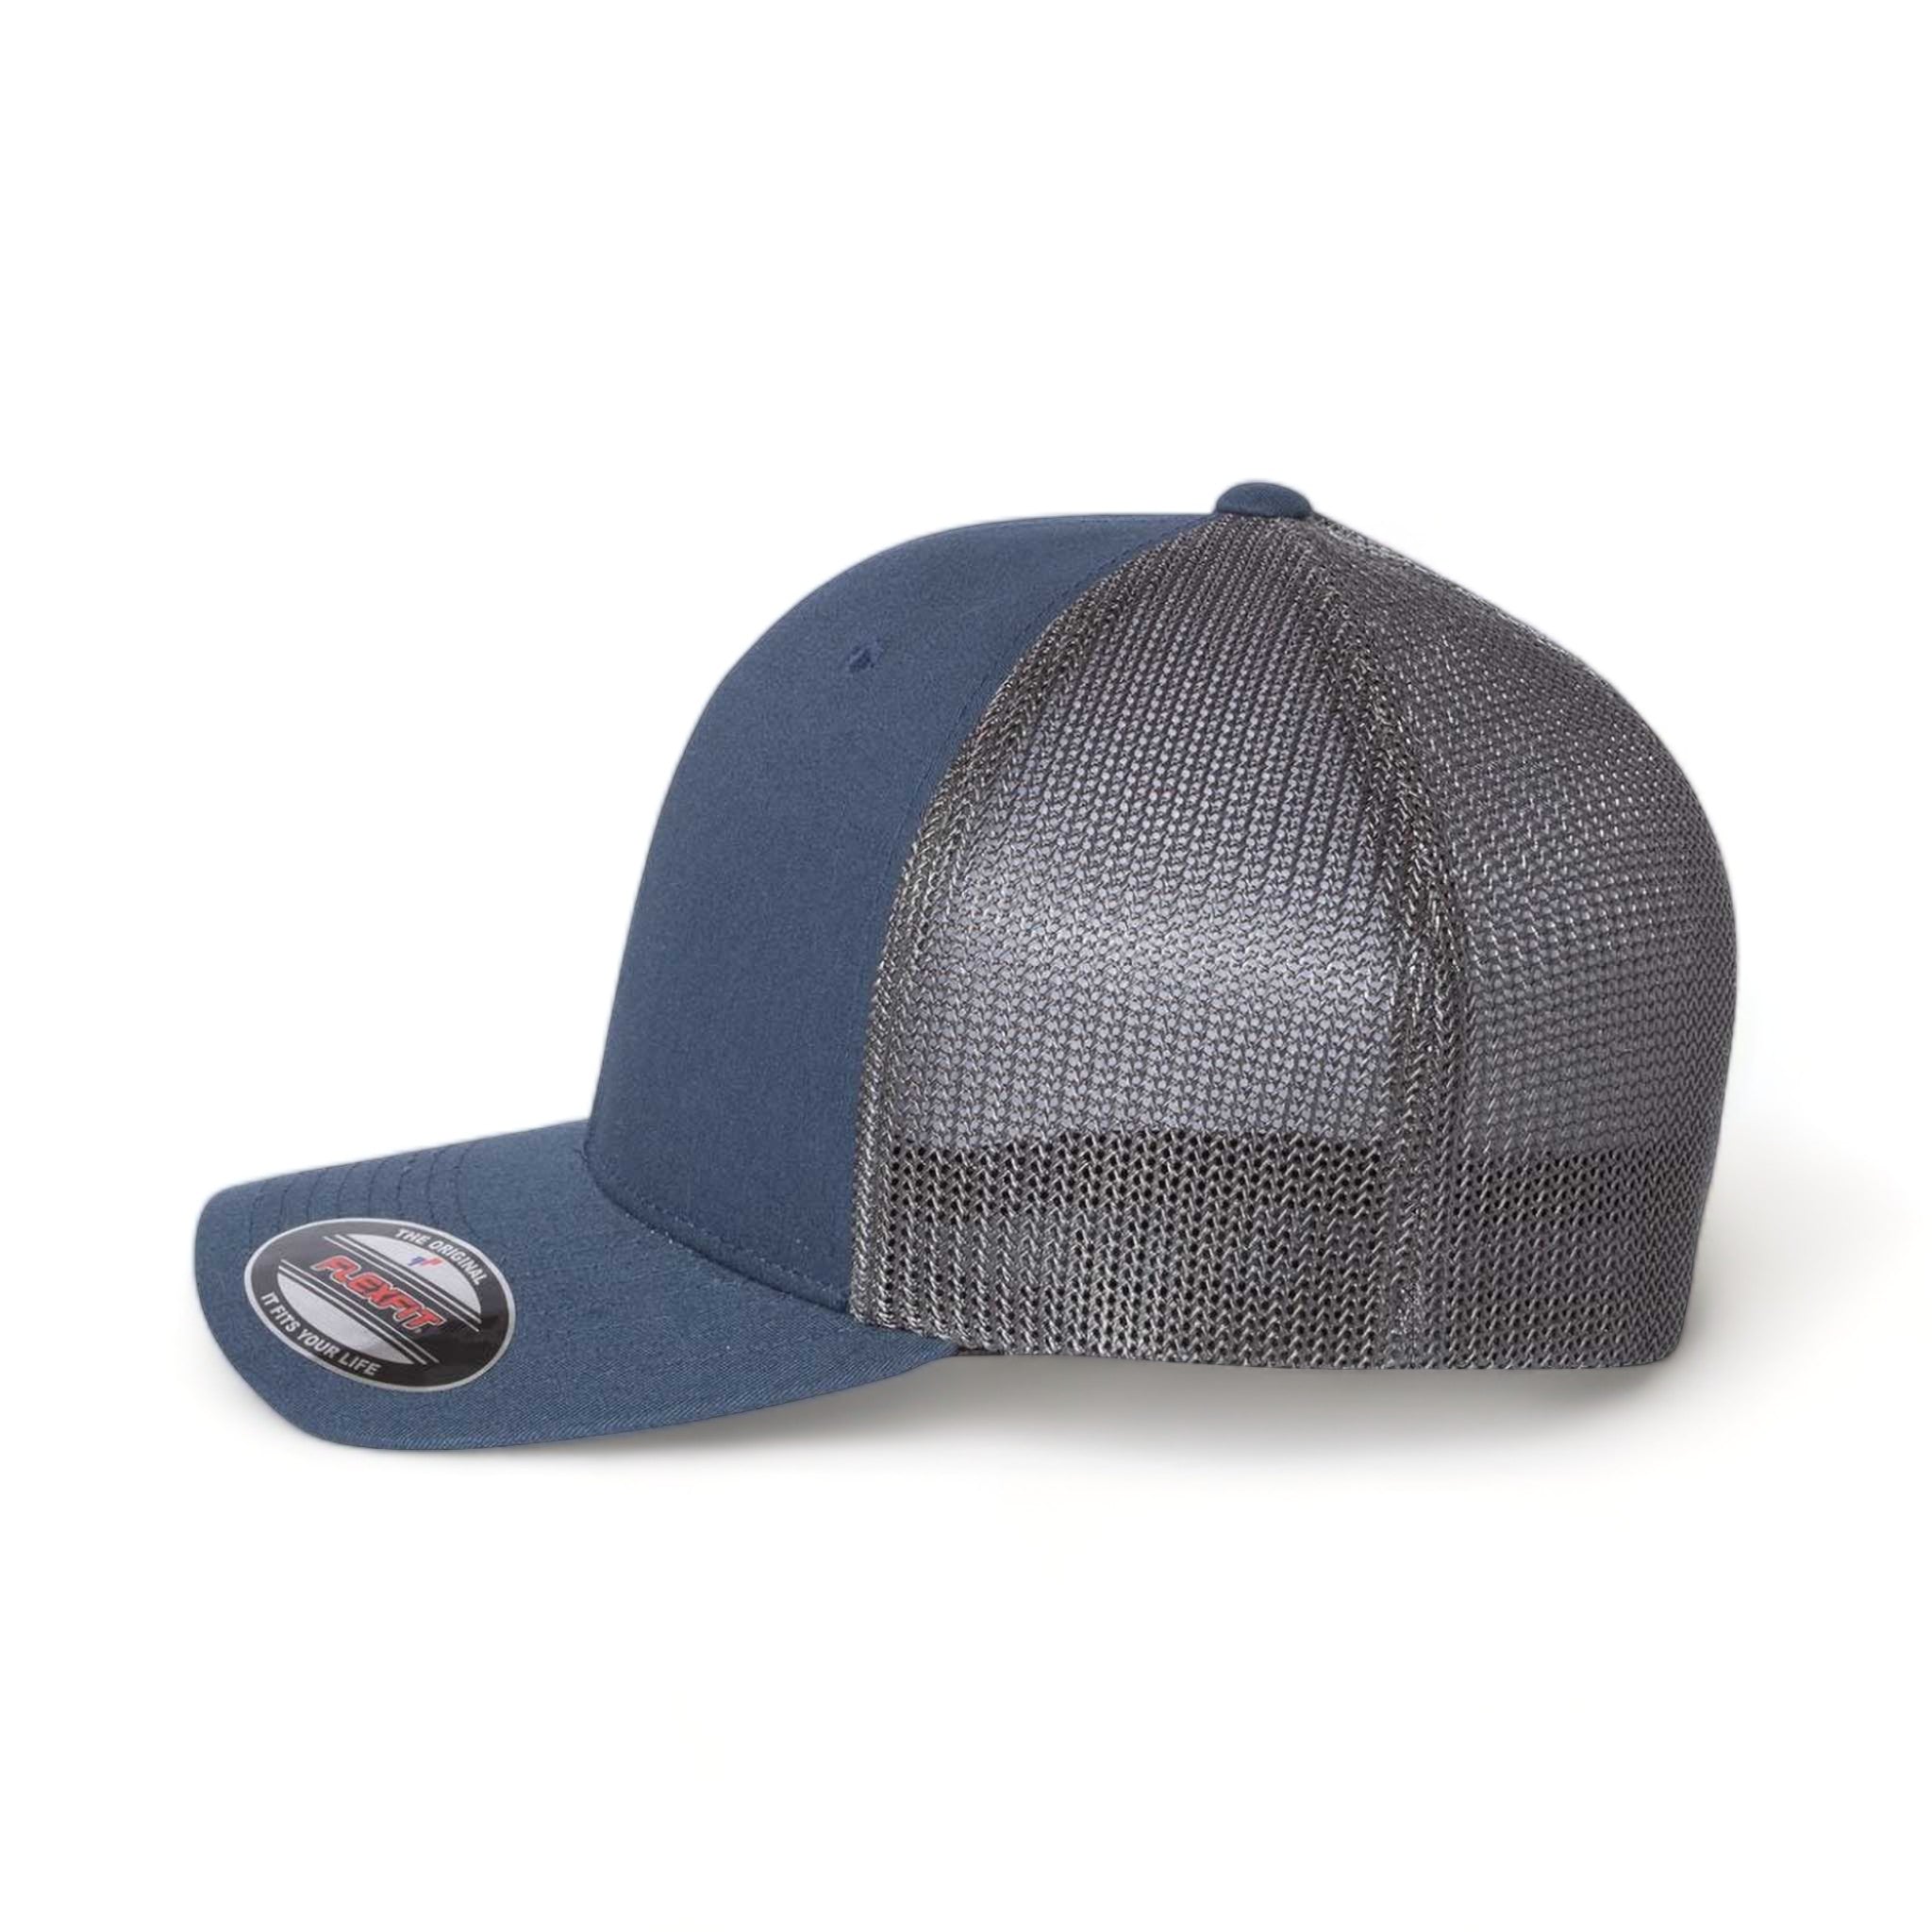 Side view of Flexfit 6511 custom hat in navy and graphite